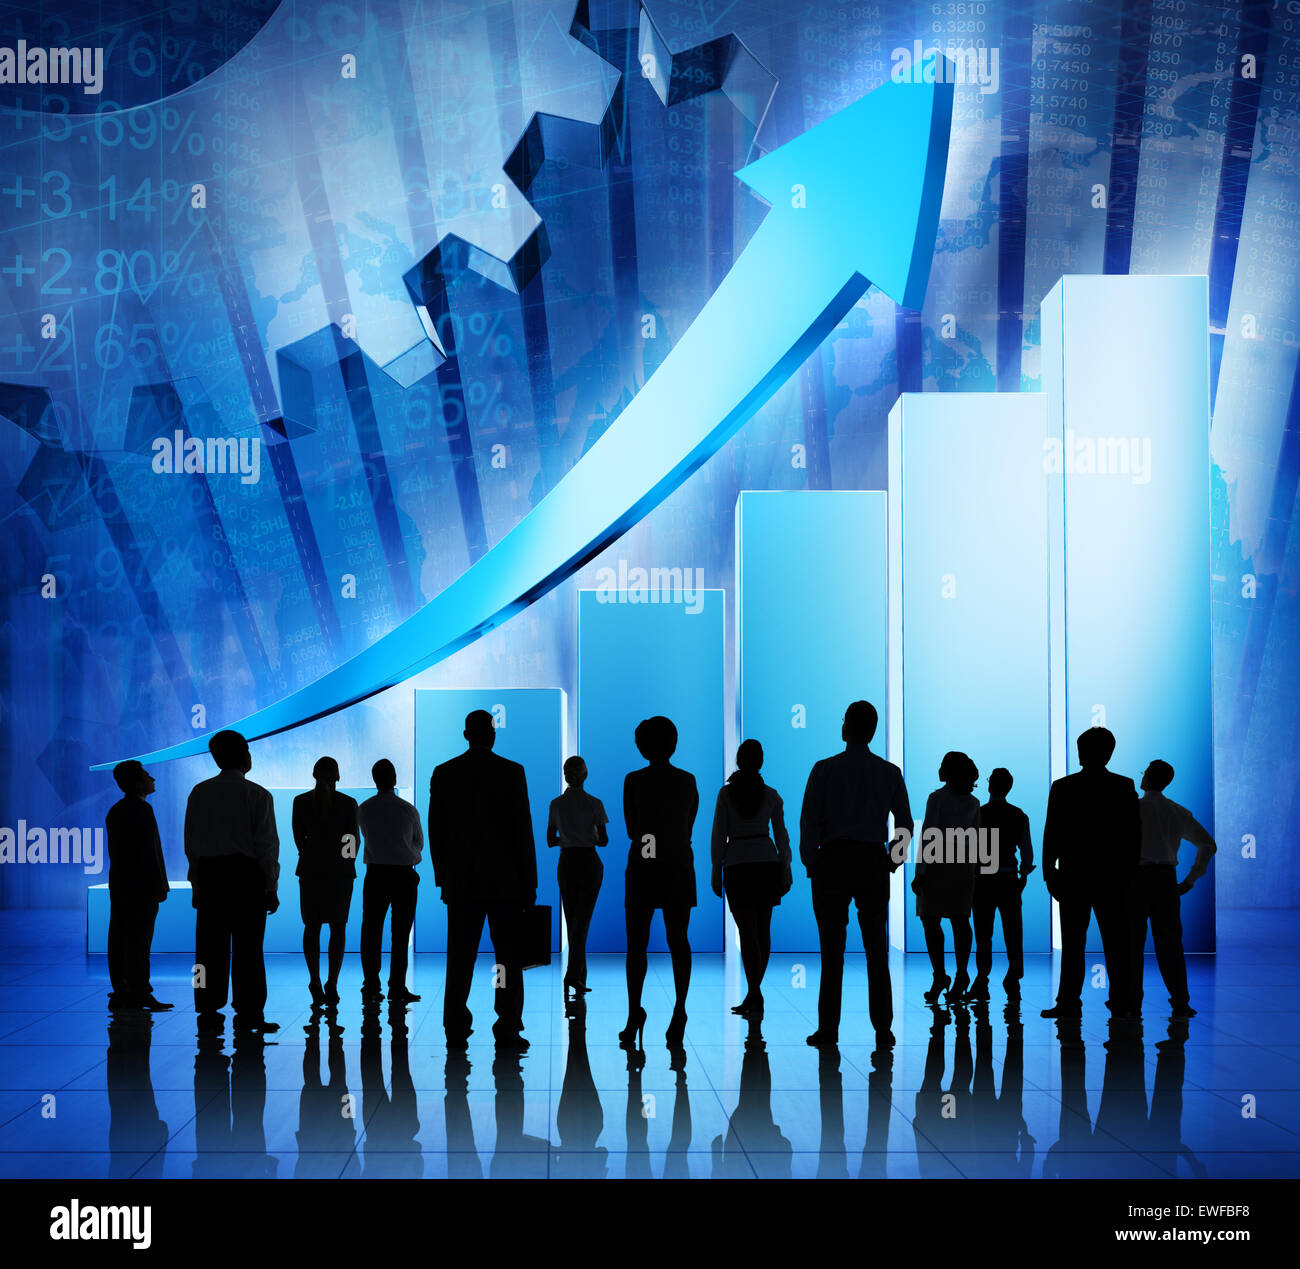 Group of Business People on Booming World Economic Stock Photo